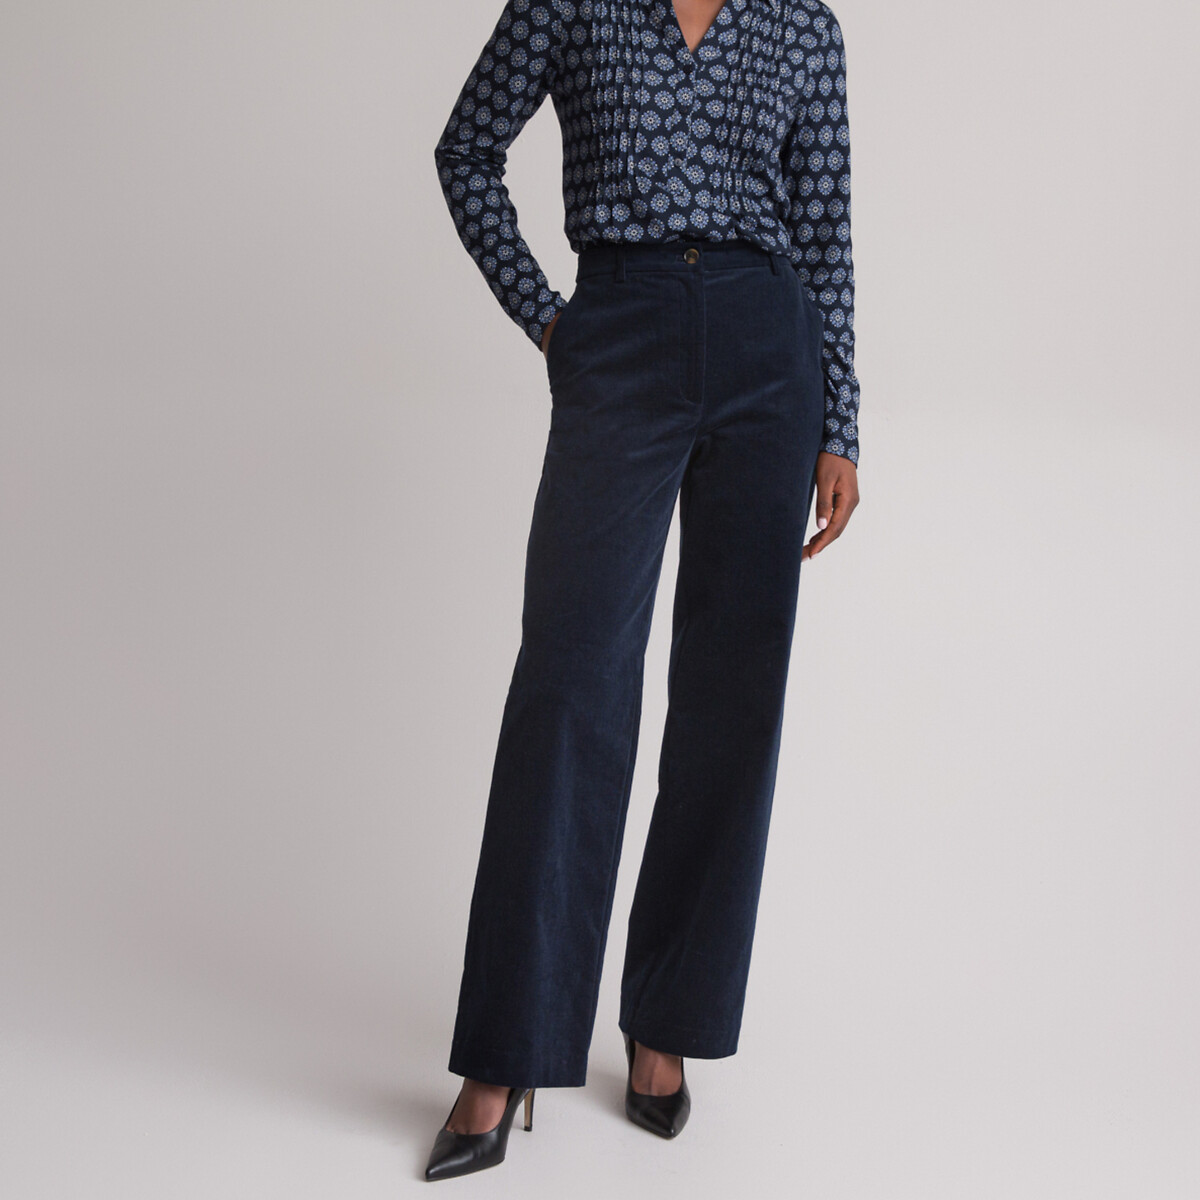 Image of Cotton Corduroy Trousers with Wide Leg, Length 31.5"